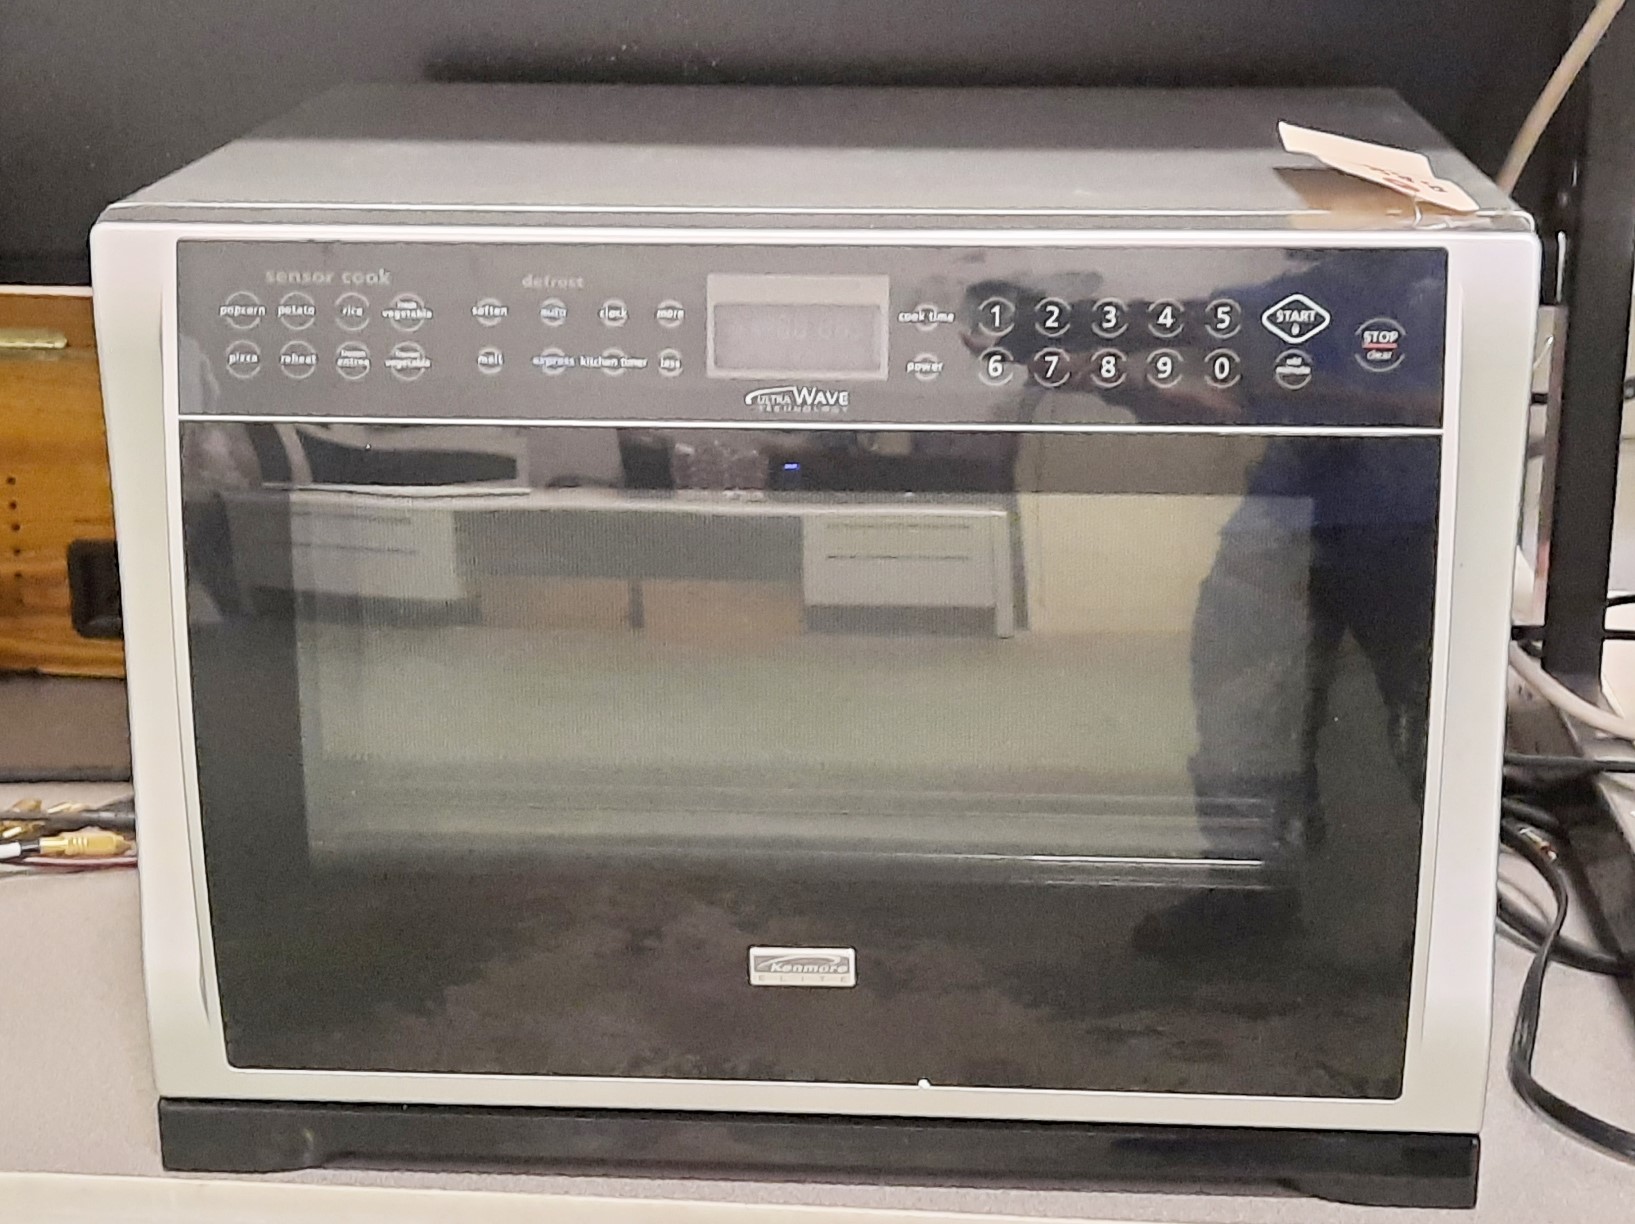 Kenmore Microwave Auction